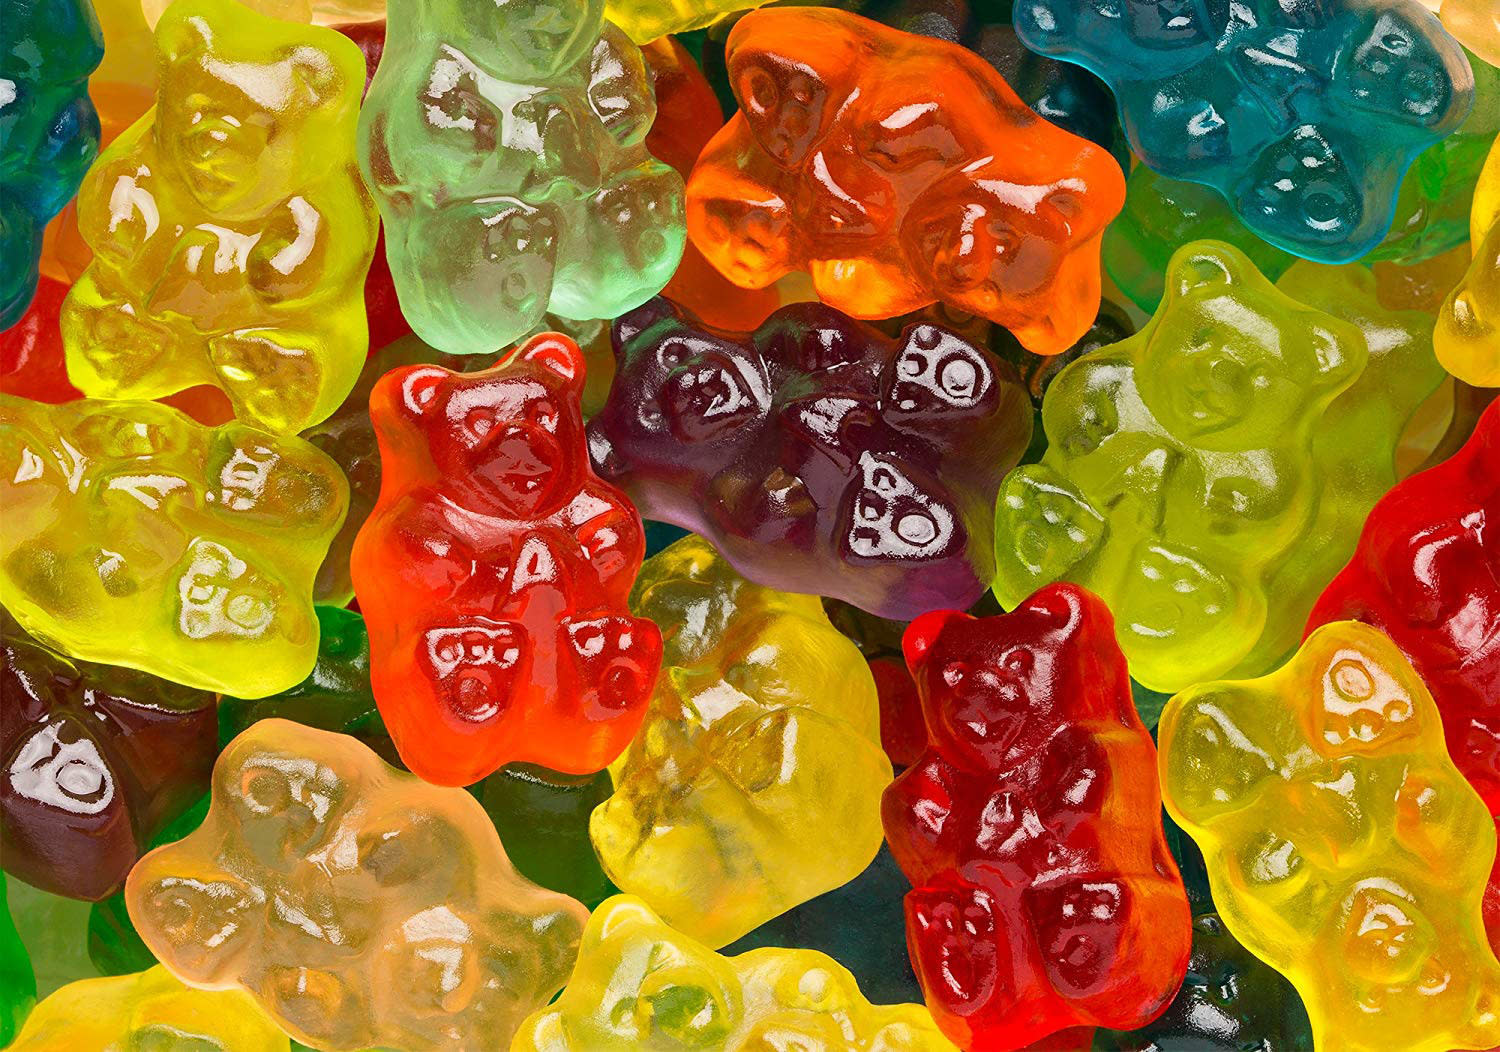 5 lbs of gummi bears for $11 is the sweetest deal on the internet.